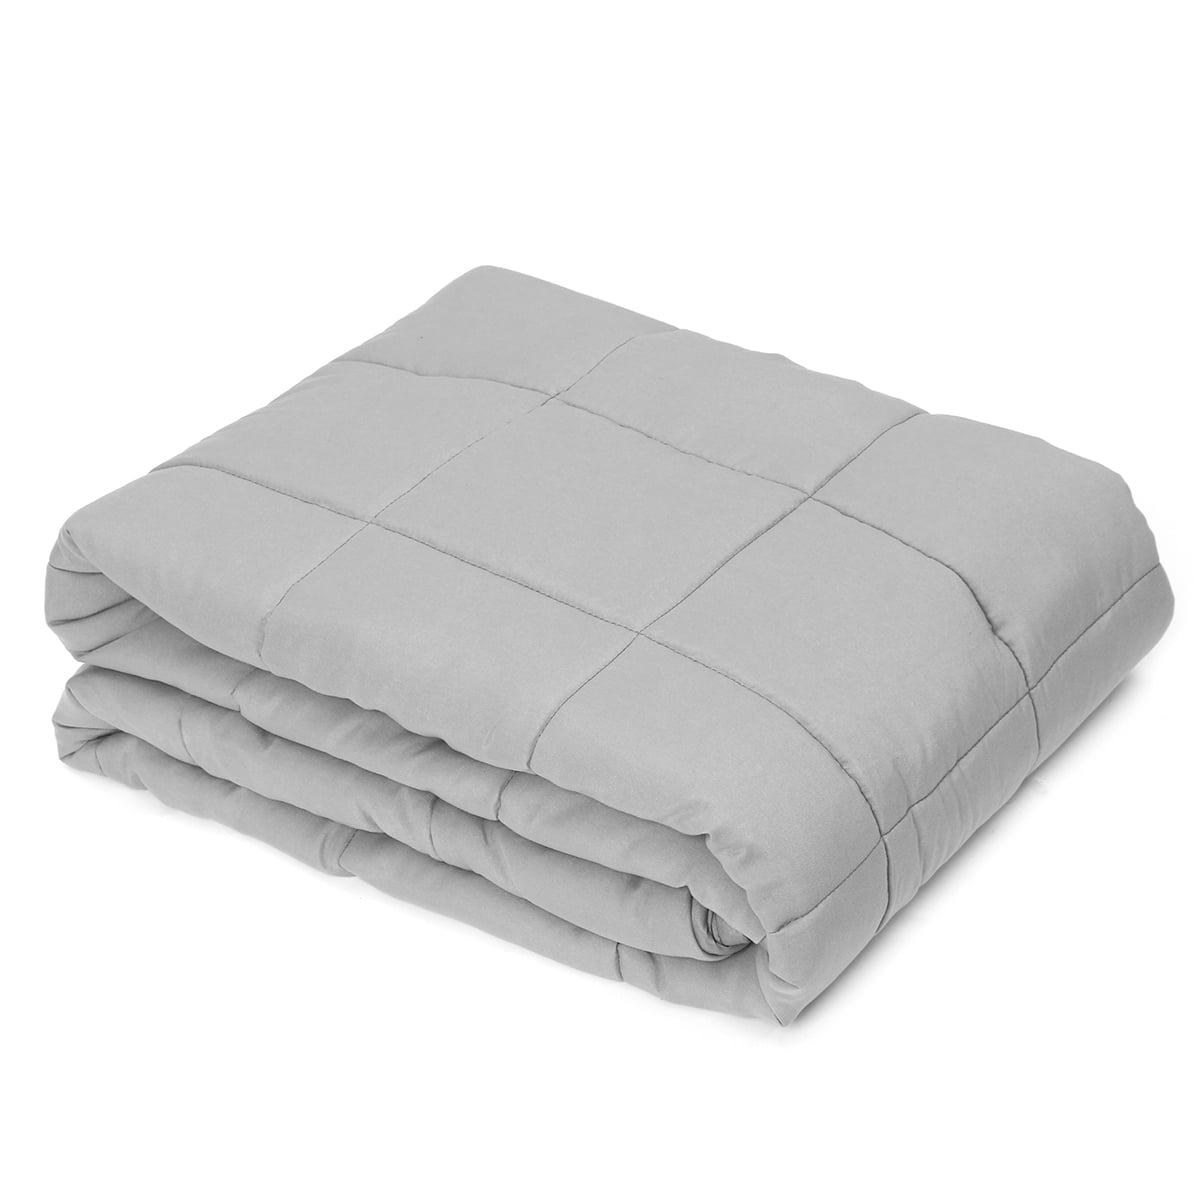 Stress Reducing Weighted Blanket 15/20/25 lbs (48''x72'', 60